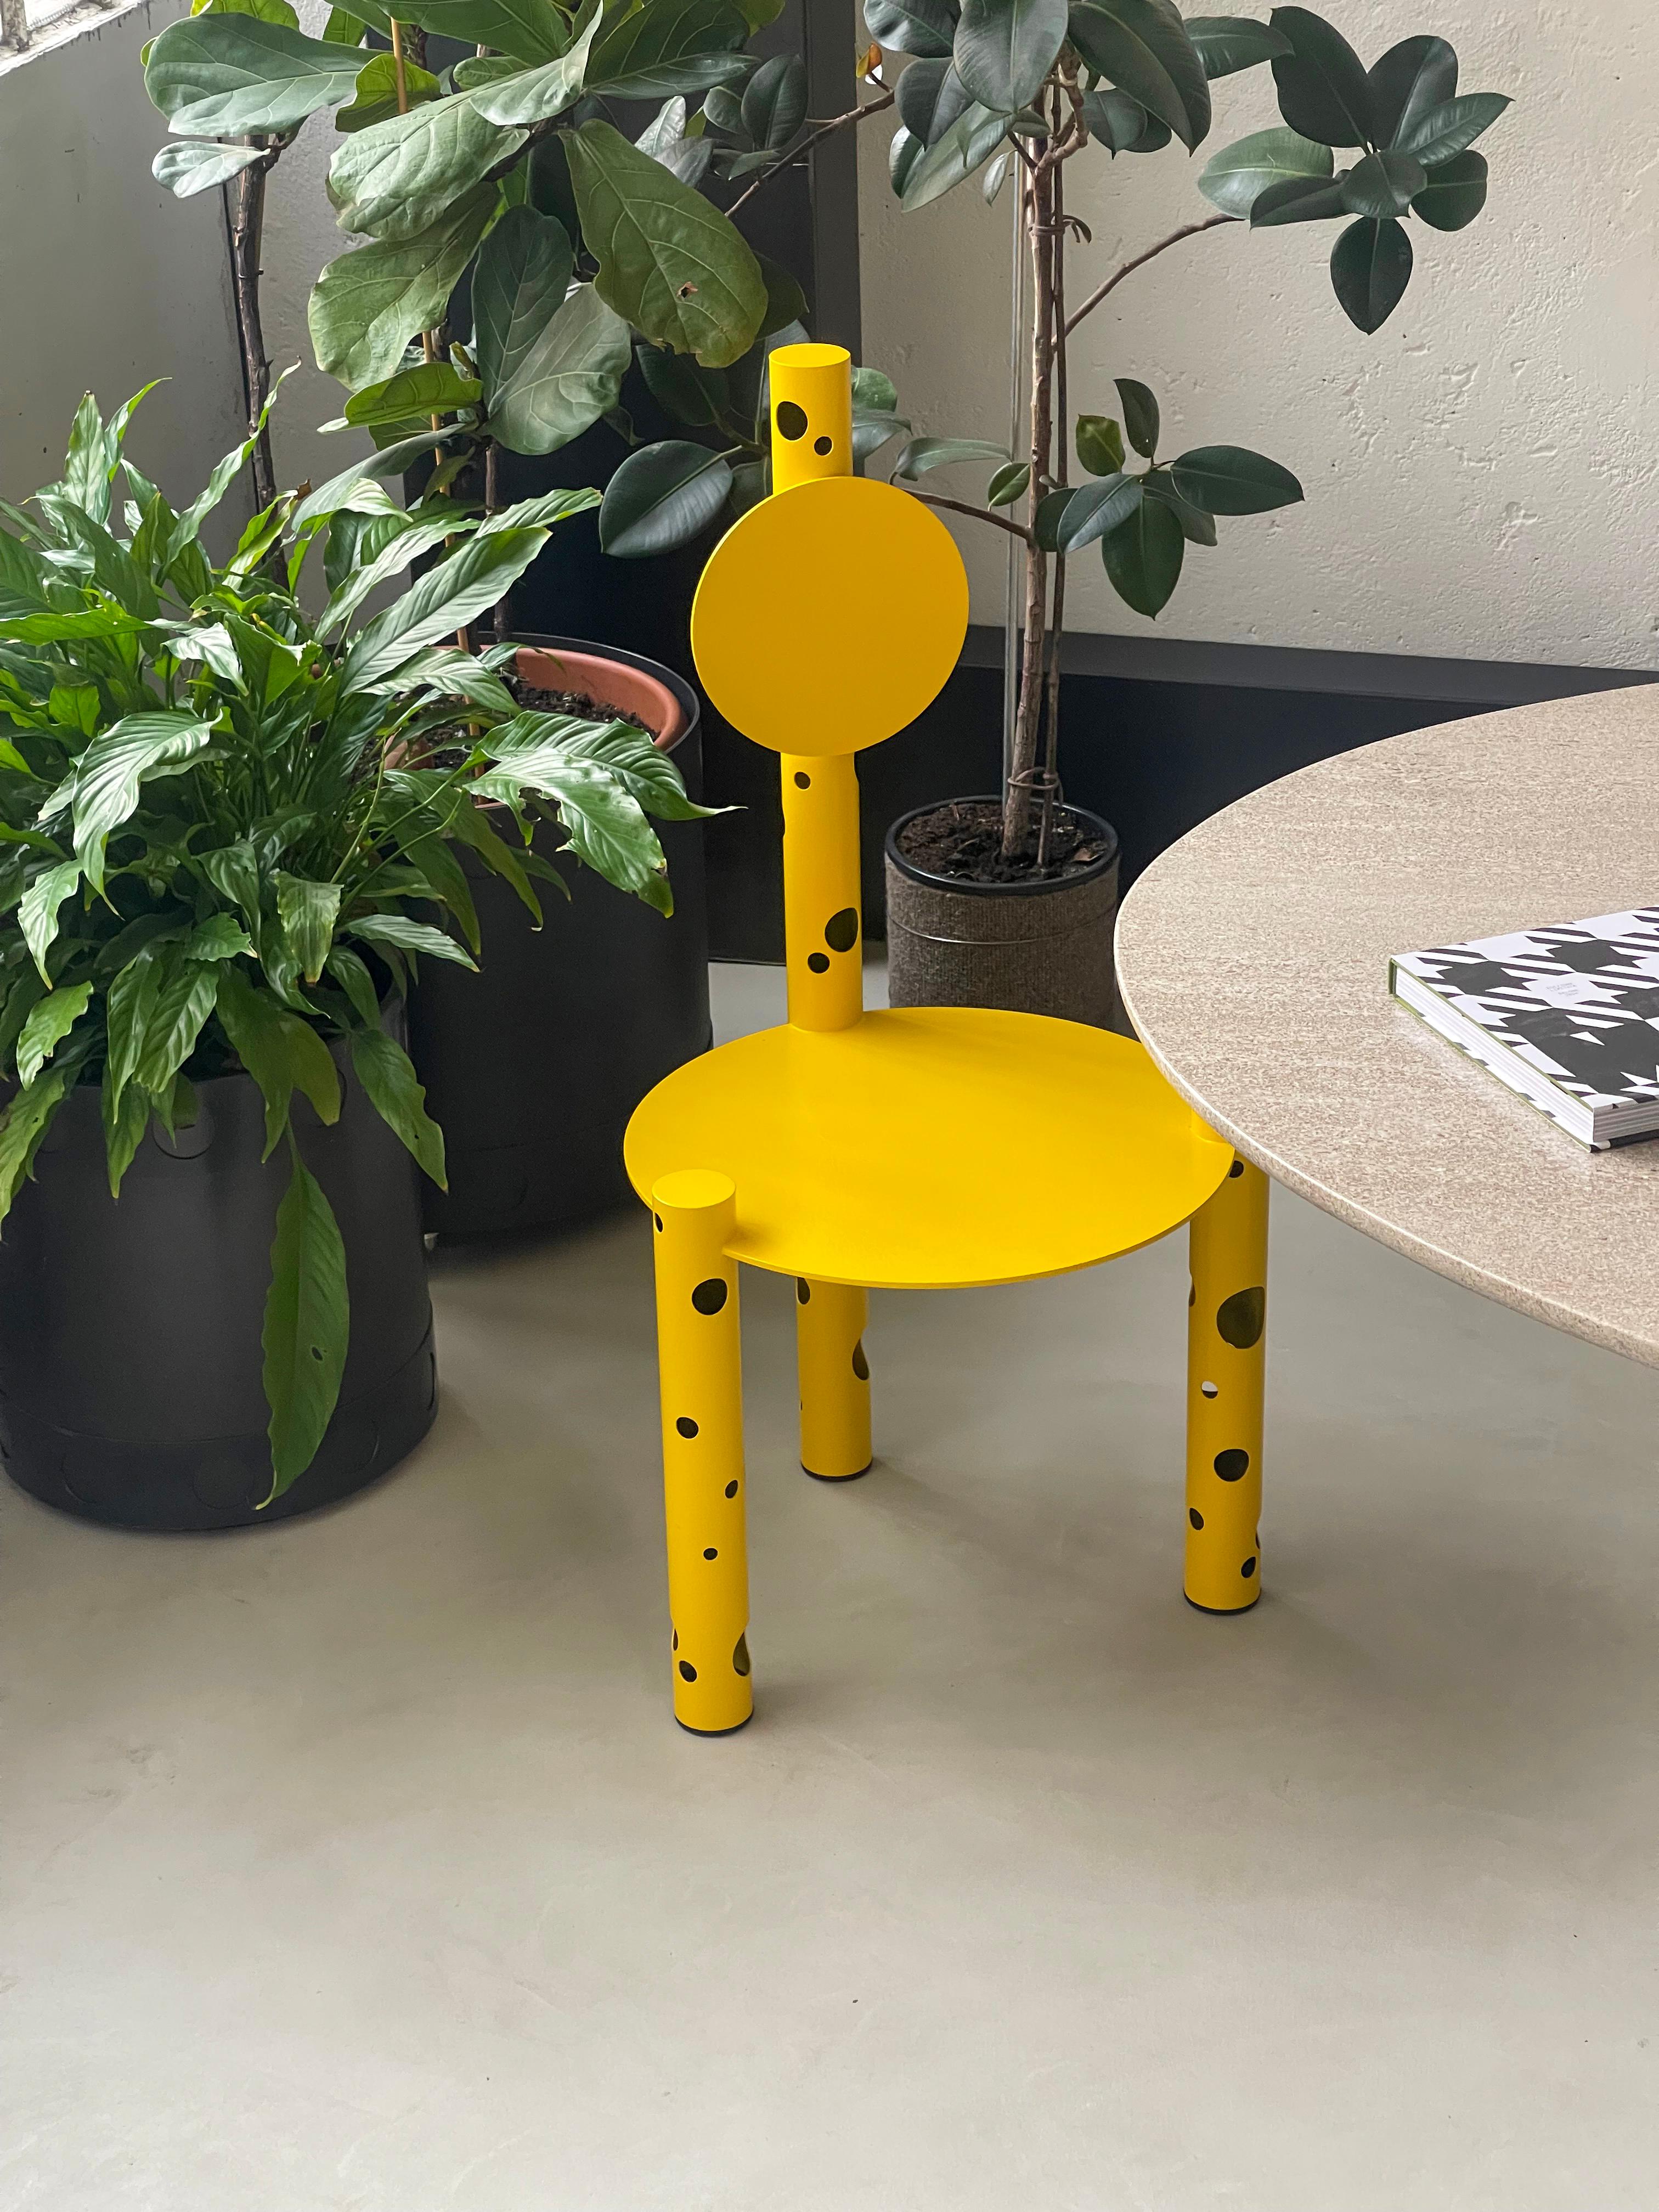 Steel Spinzi SIlös Chair, Collectible Italian Design, Bright Yellow Sculptural Seating For Sale